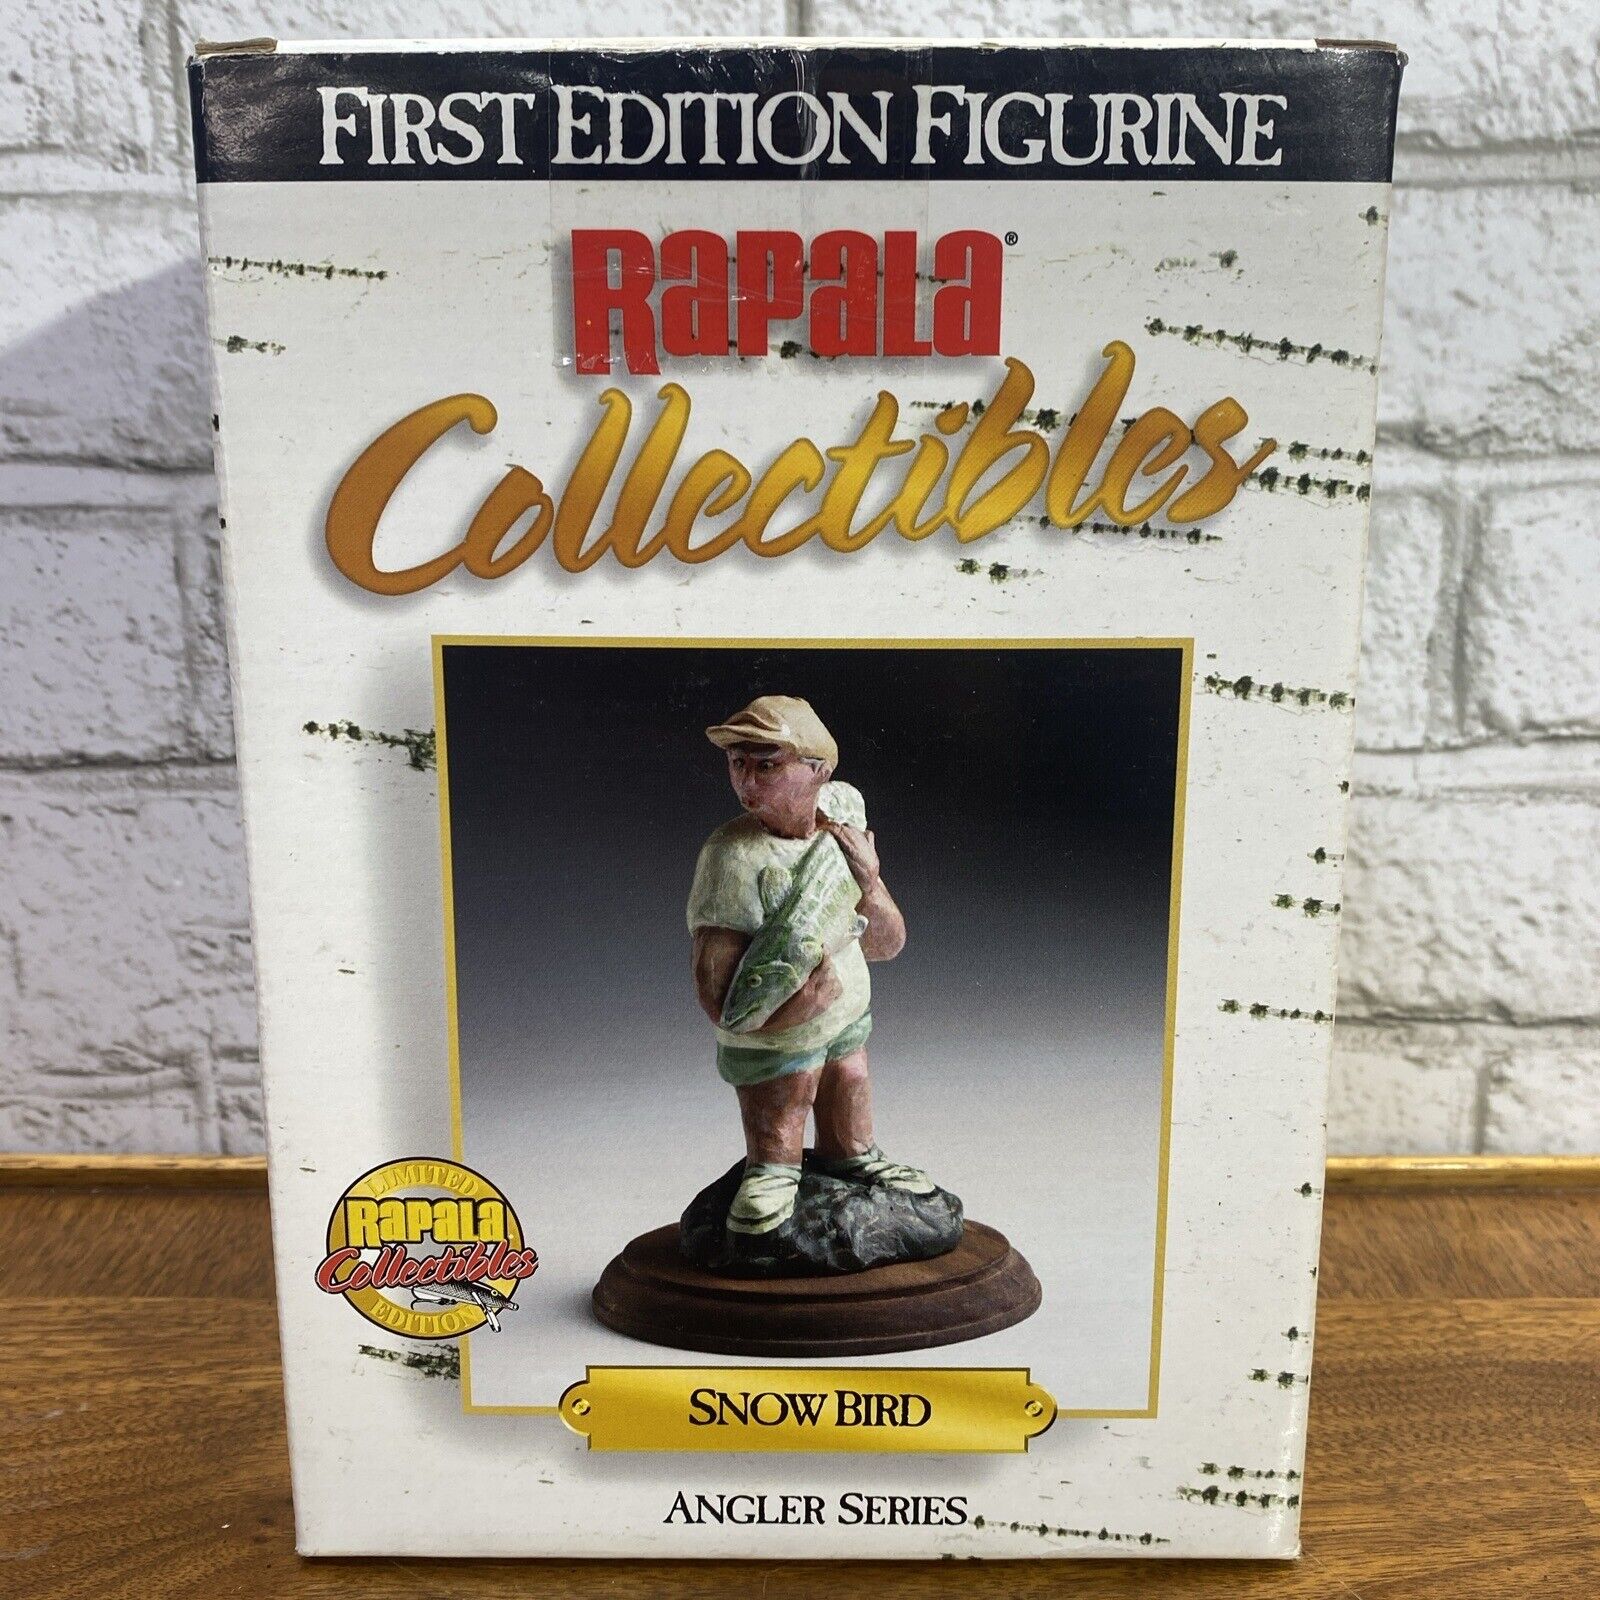 New First Edition Figurine Rapala Collectibles Angler Series Snowbird Limited Ed